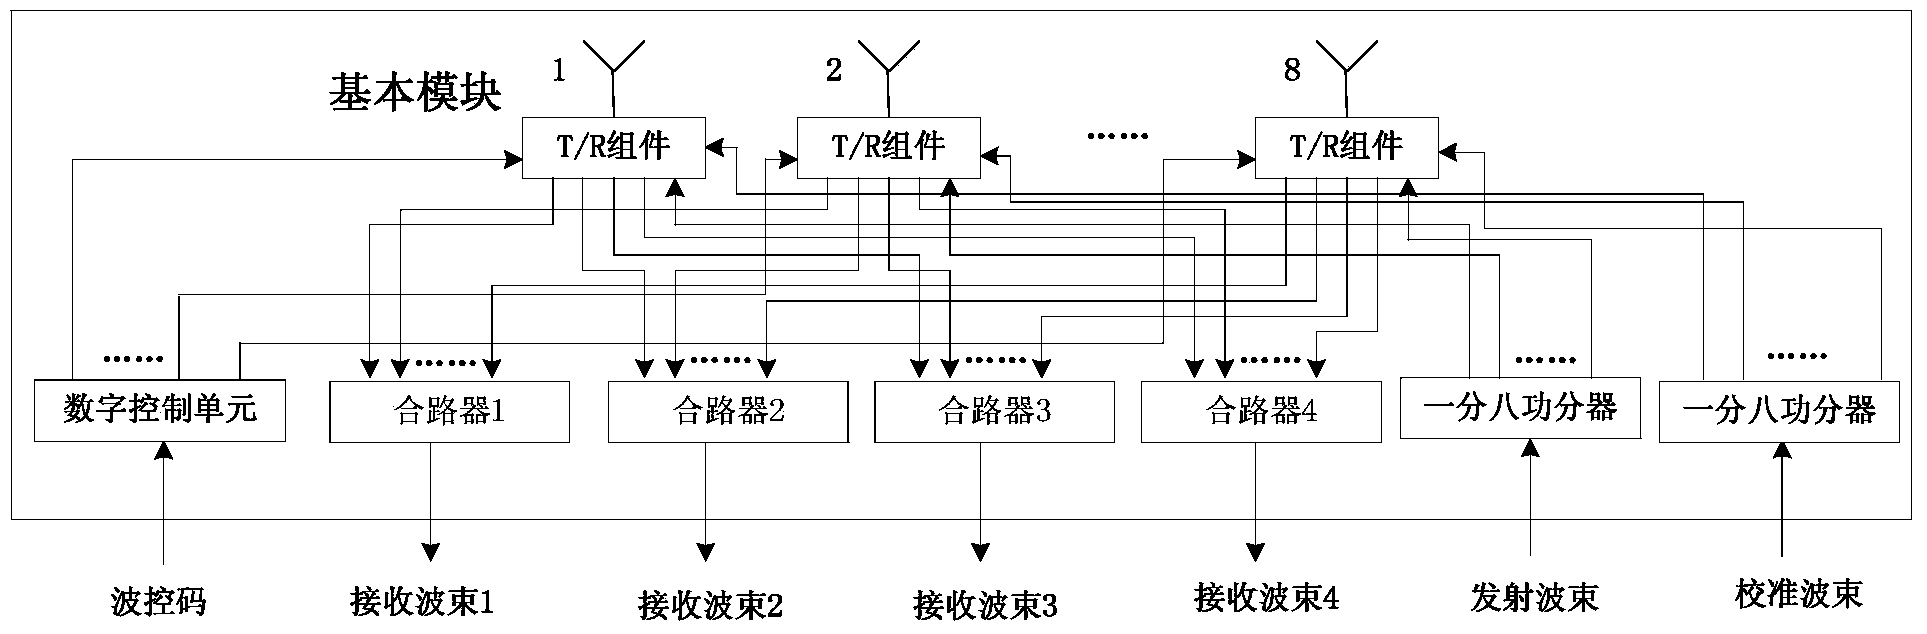 Eight-unit T/R (transmitting/receiving) basic module with function of S-band multi-beam transceiving duplexing